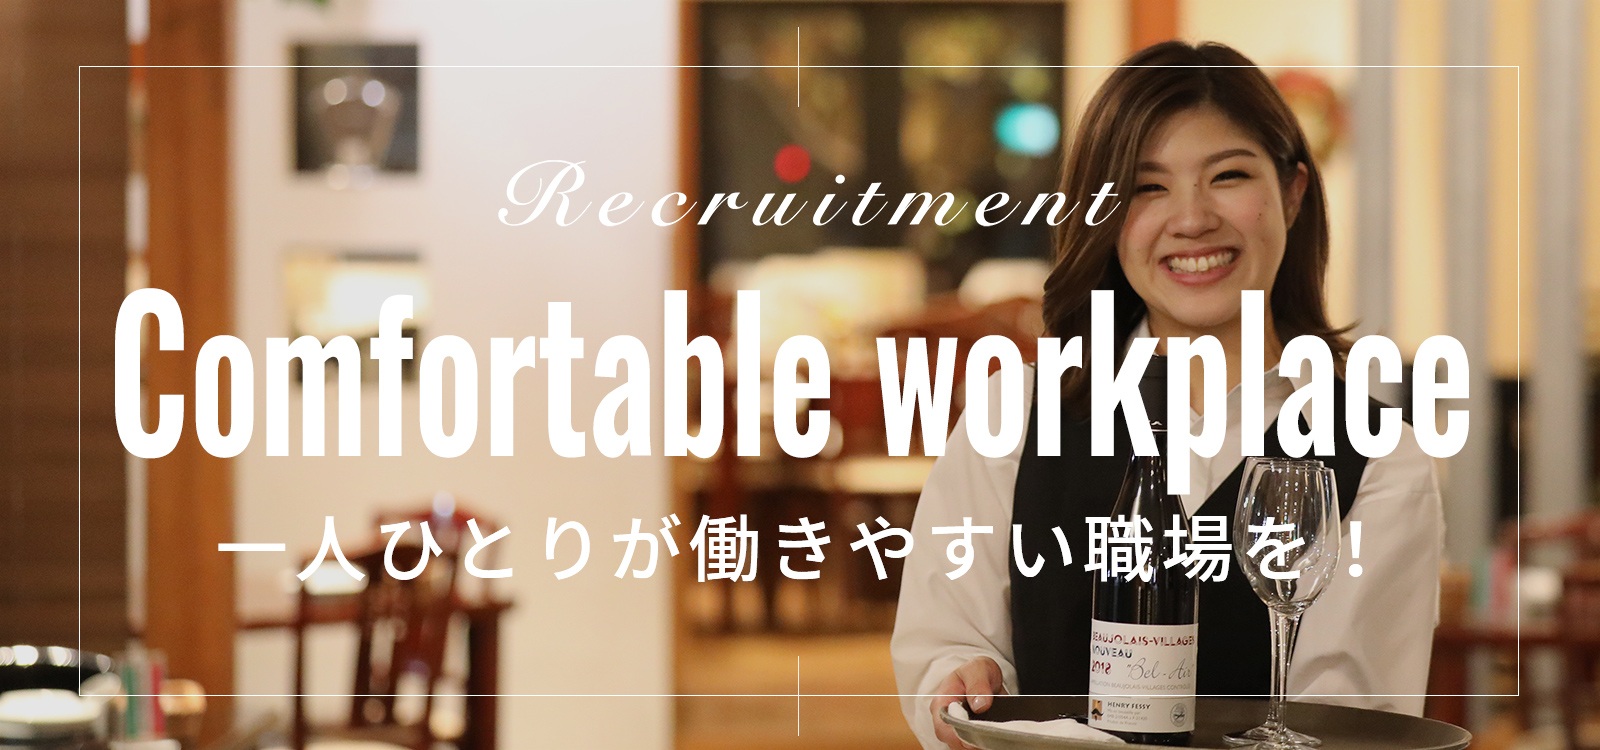 A Comfortable Workplace 一人ひとりが働きやすい職場を！